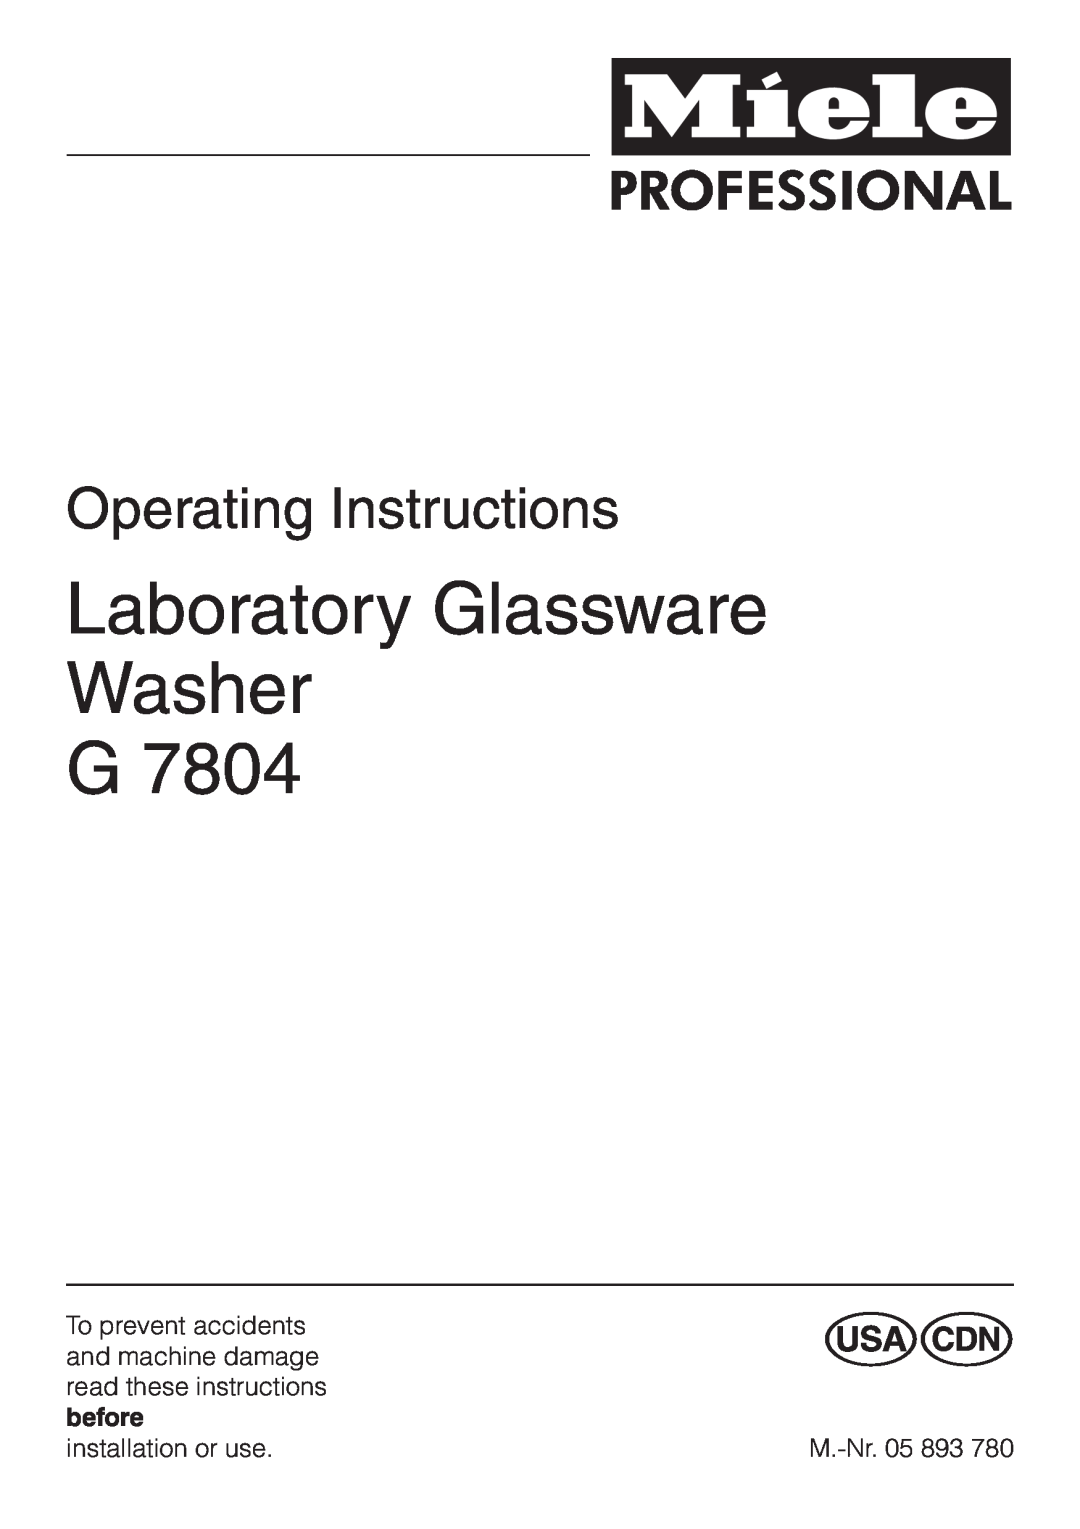 Miele G 7804 manual Operating Instructions, Laboratory Glassware Washer G 